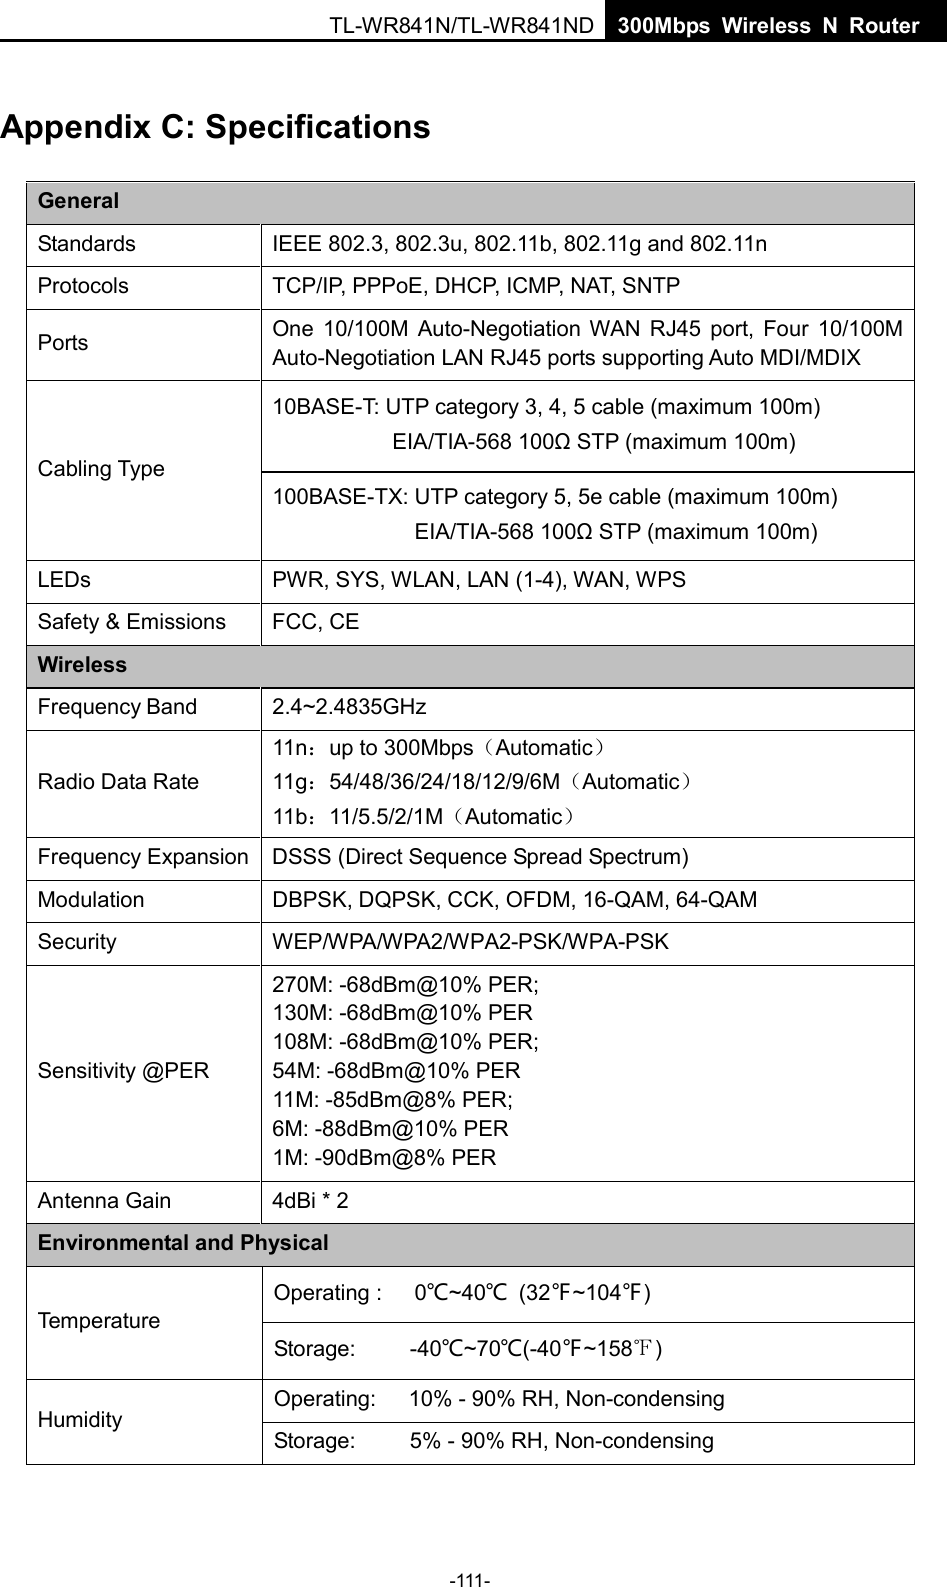 TL-WR841N/TL-WR841ND  300Mbps Wireless N Router Appendix C: Specifications General Standards IEEE 802.3, 802.3u, 802.11b, 802.11g and 802.11n Protocols TCP/IP, PPPoE, DHCP, ICMP, NAT, SNTP Ports One 10/100M Auto-Negotiation WAN RJ45 port, Four 10/100M Auto-Negotiation LAN RJ45 ports supporting Auto MDI/MDIX Cabling Type 10BASE-T: UTP category 3, 4, 5 cable (maximum 100m) EIA/TIA-568 100Ω STP (maximum 100m) 100BASE-TX: UTP category 5, 5e cable (maximum 100m) EIA/TIA-568 100Ω STP (maximum 100m) LEDs  PWR, SYS, WLAN, LAN (1-4), WAN, WPS Safety &amp; Emissions FCC, CE Wireless Frequency Band 2.4~2.4835GHz Radio Data Rate 11n：up to 300Mbps（Automatic） 11g：54/48/36/24/18/12/9/6M（Automatic） 11b：11/5.5/2/1M（Automatic） Frequency Expansion DSSS (Direct Sequence Spread Spectrum) Modulation DBPSK, DQPSK, CCK, OFDM, 16-QAM, 64-QAM Security WEP/WPA/WPA2/WPA2-PSK/WPA-PSK Sensitivity @PER 270M: -68dBm@10% PER; 130M: -68dBm@10% PER 108M: -68dBm@10% PER; 54M: -68dBm@10% PER 11M: -85dBm@8% PER;   6M: -88dBm@10% PER 1M: -90dBm@8% PER Antenna Gain 4dBi * 2 Environmental and Physical Te m perature Operating :   0℃~40℃  (32℉~104℉) Storage:     -40℃~70℃(-40℉~158℉) Humidity Operating:   10% - 90% RH, Non-condensing Storage:     5% - 90% RH, Non-condensing -111- 